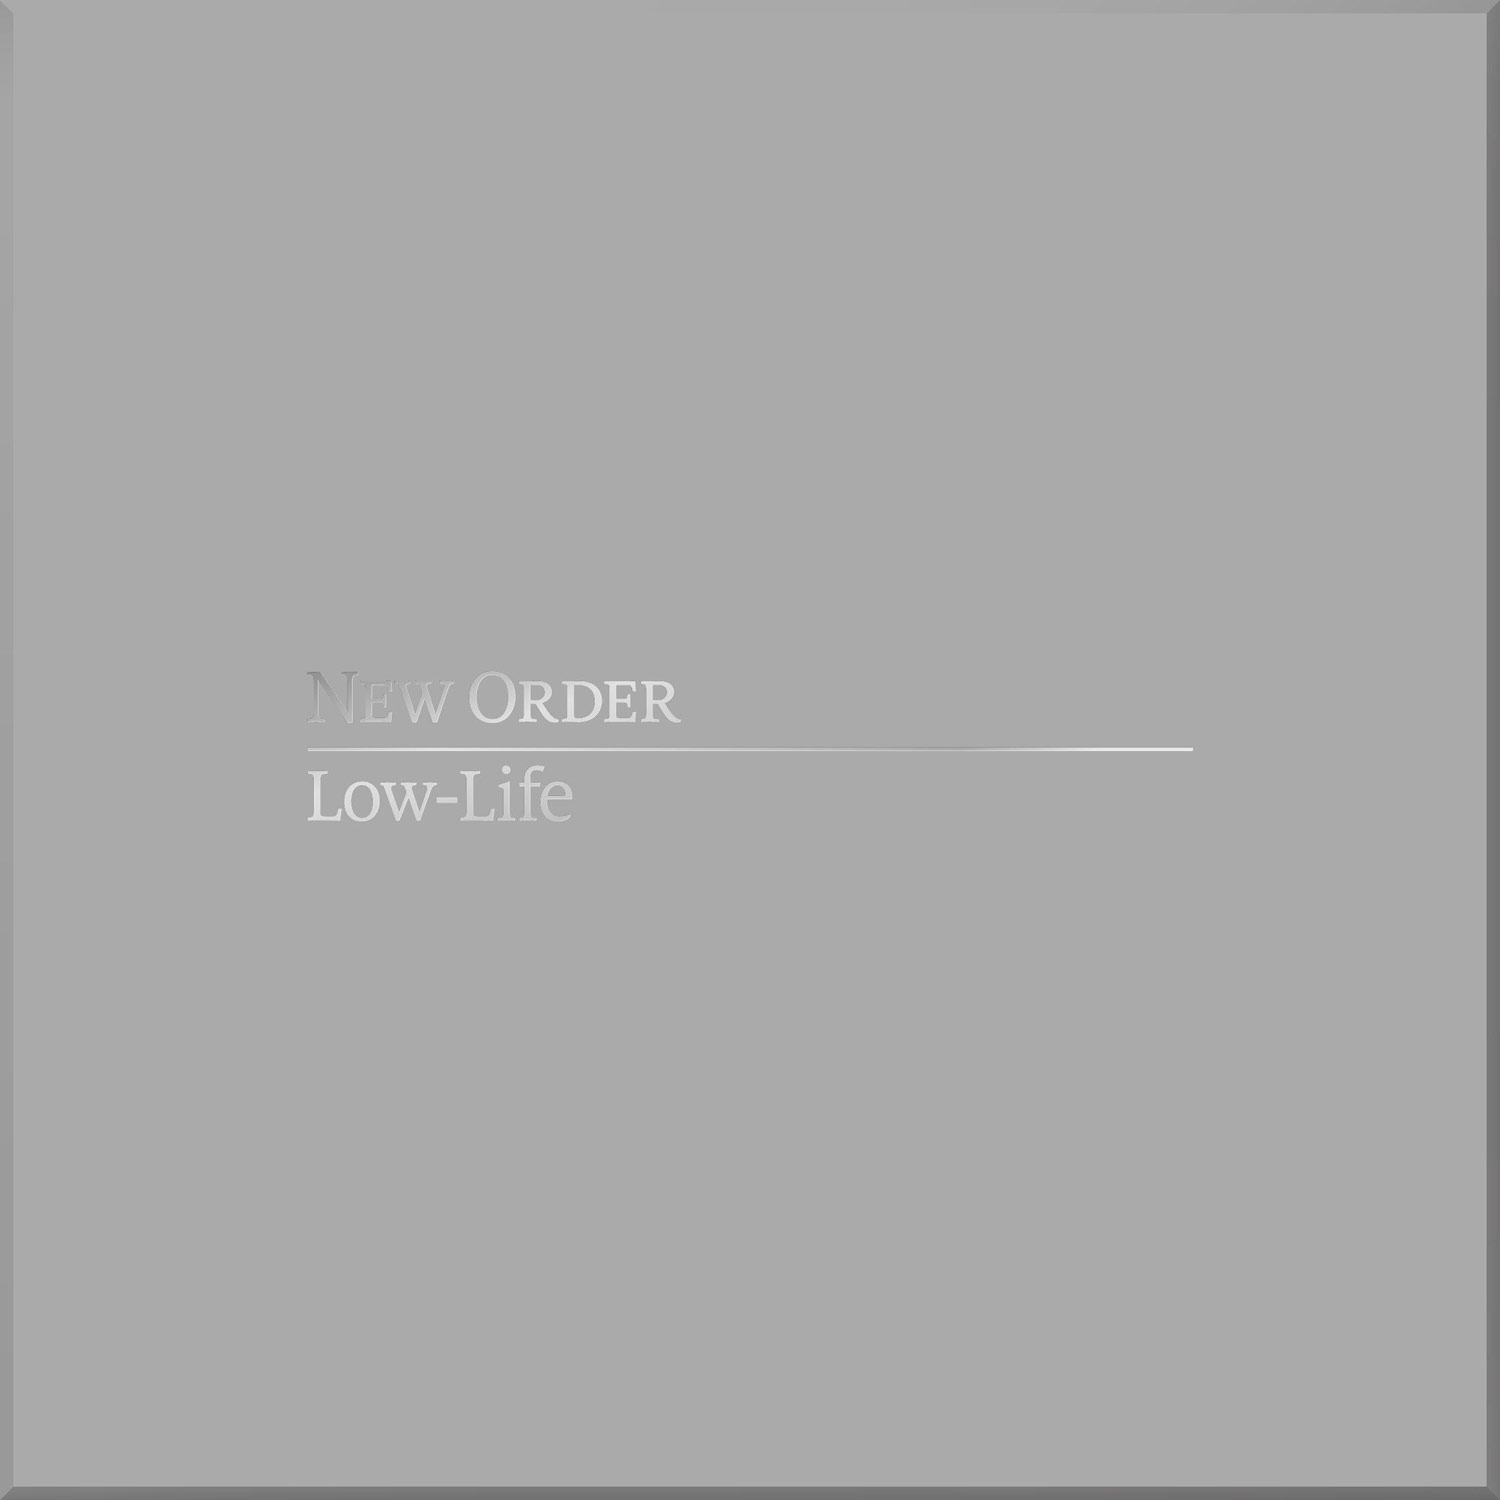 NEWS: New Order announce release of 'Low-Life' definitive edition & limited edition 12" singles